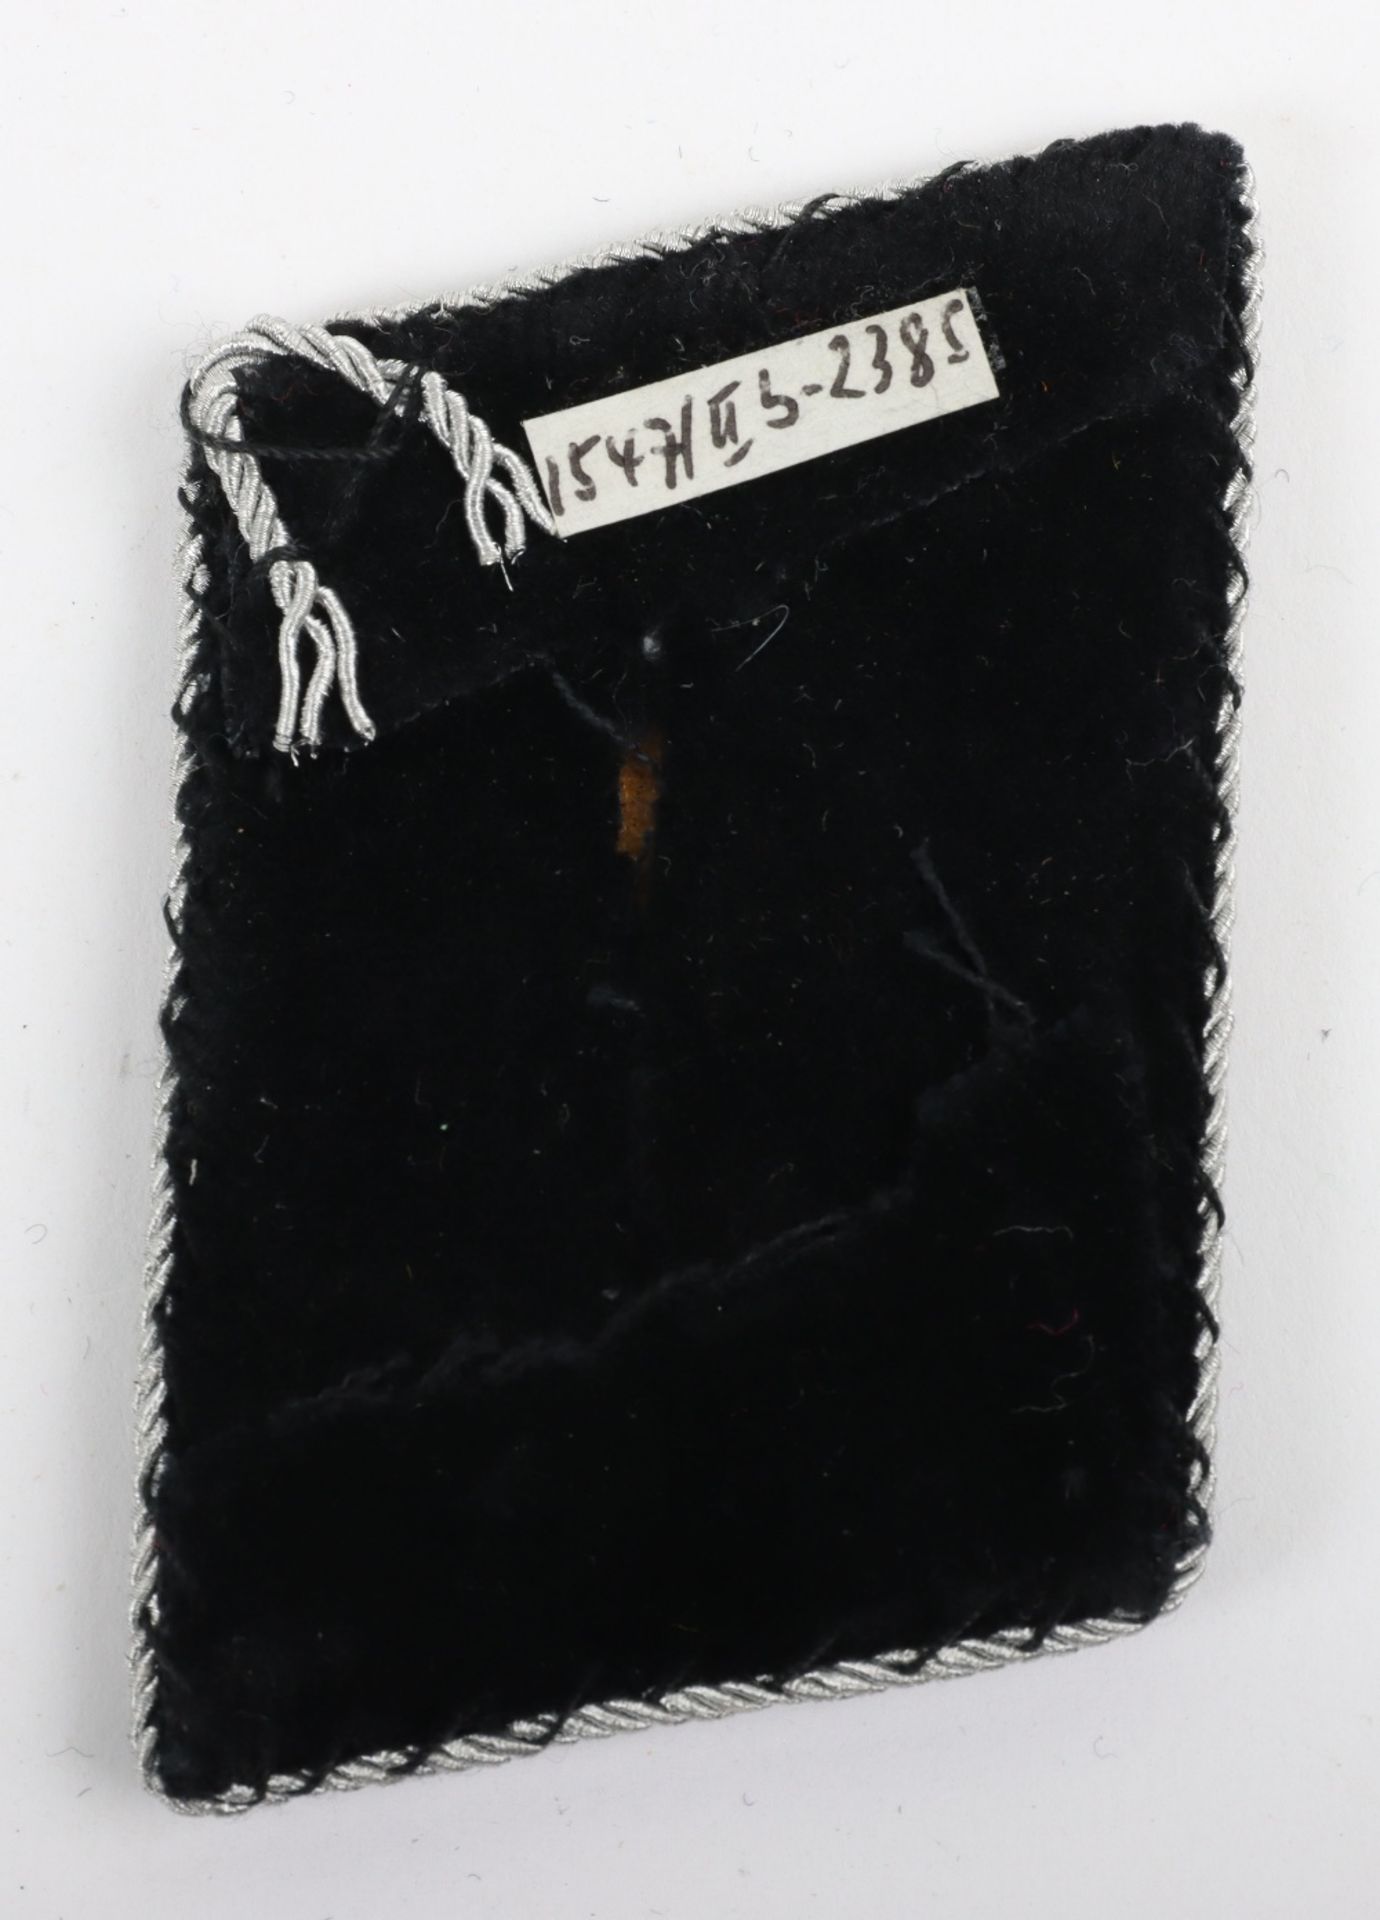 Single Collar Tab of Reichsfuhrer-SS - Image 2 of 2